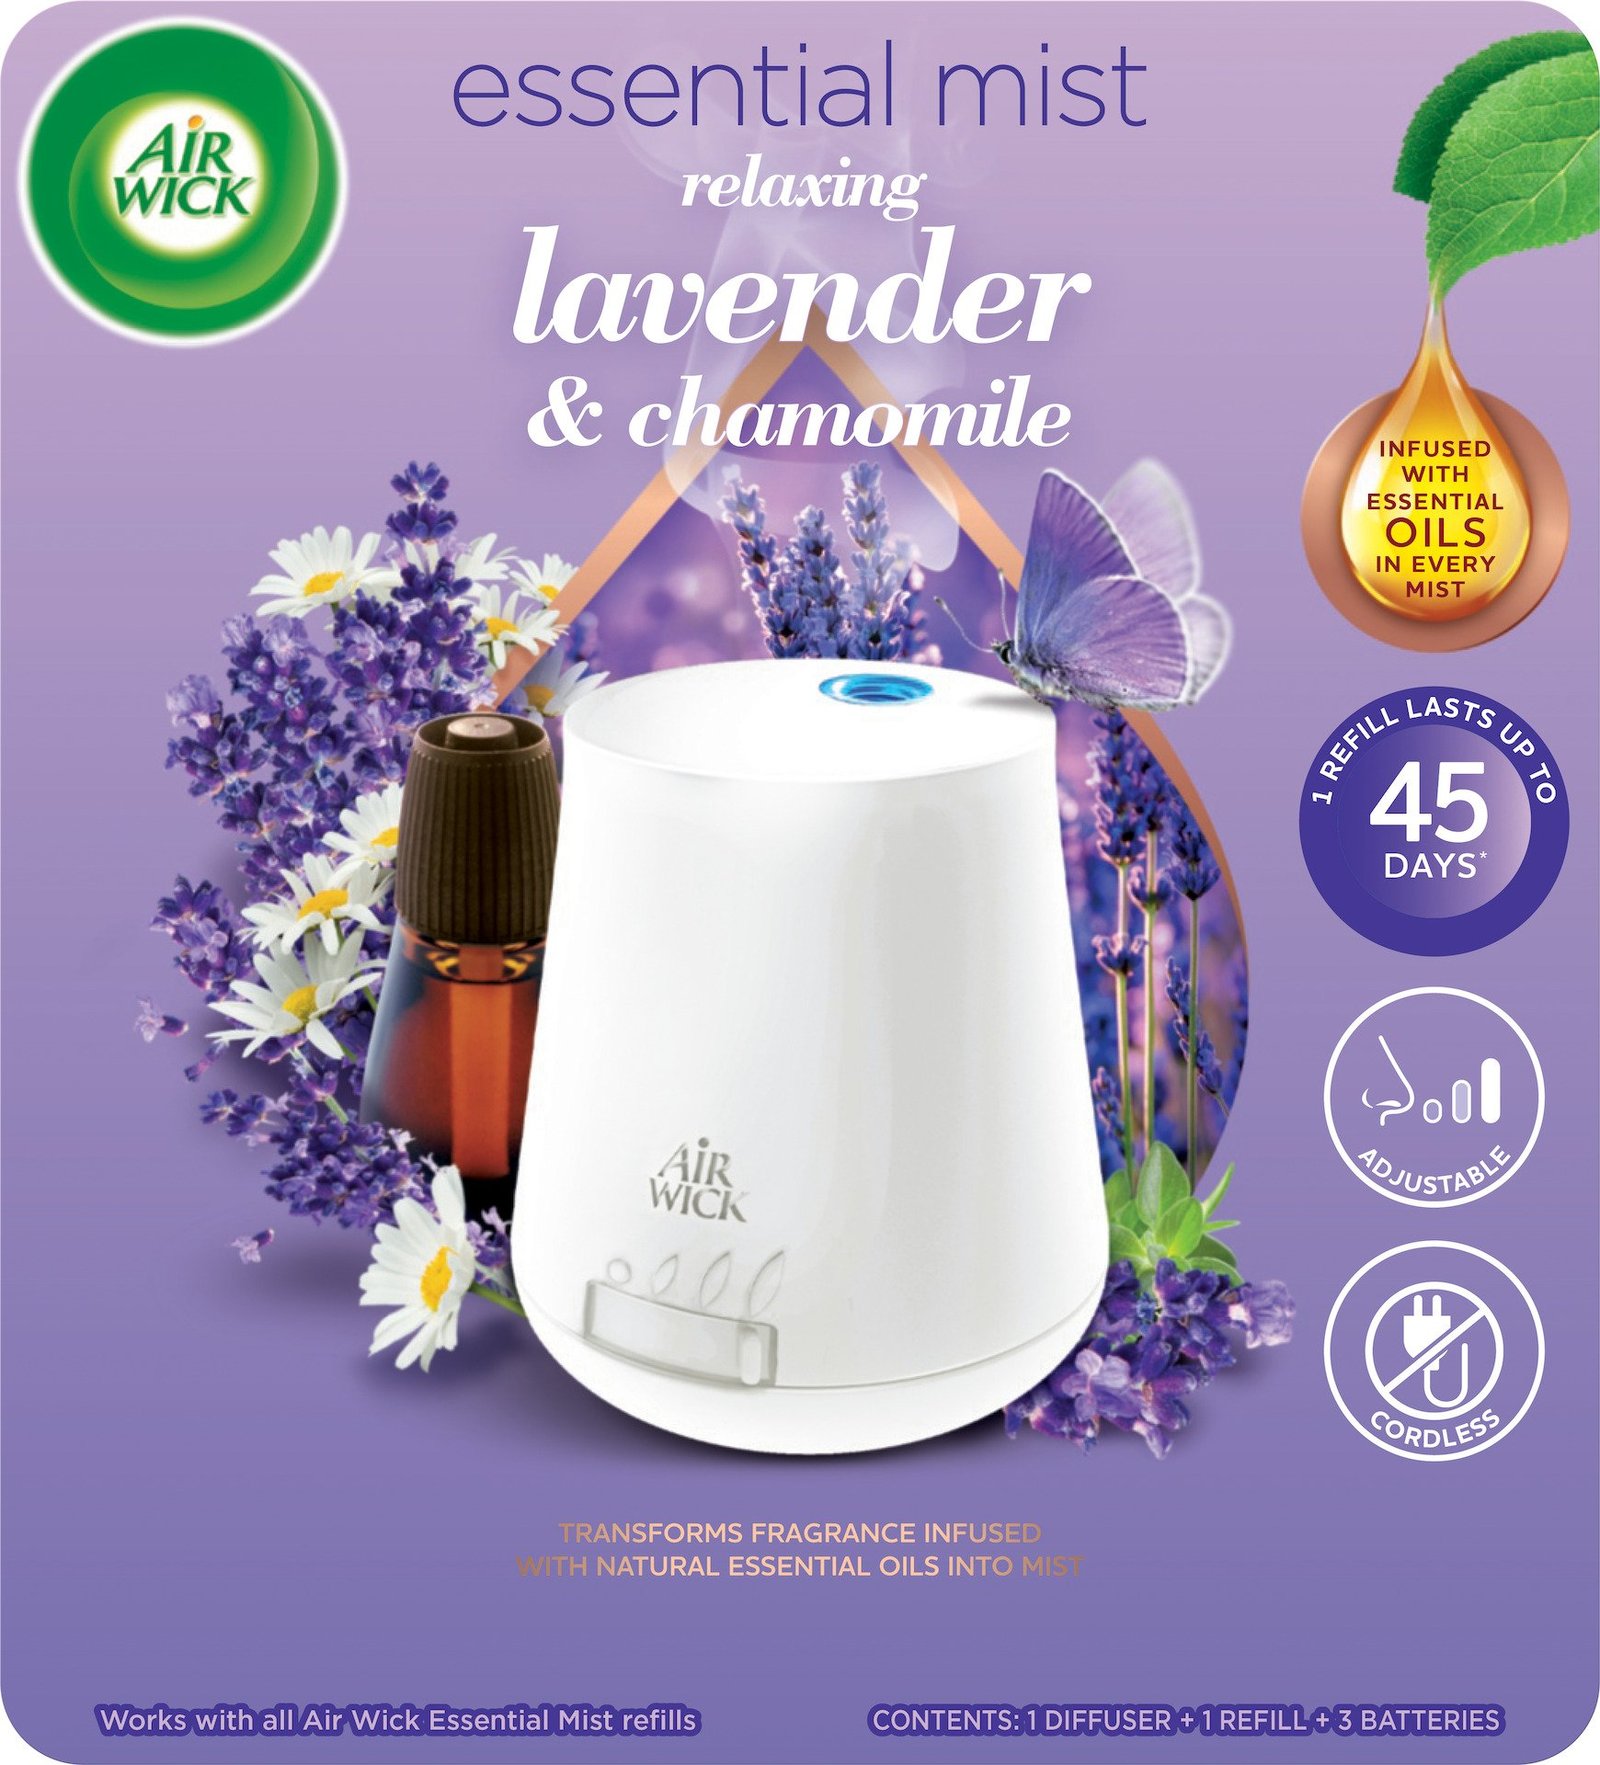 Air Wick Essential Mist Relaxing Lavender Diffuser + Refill 20 ml